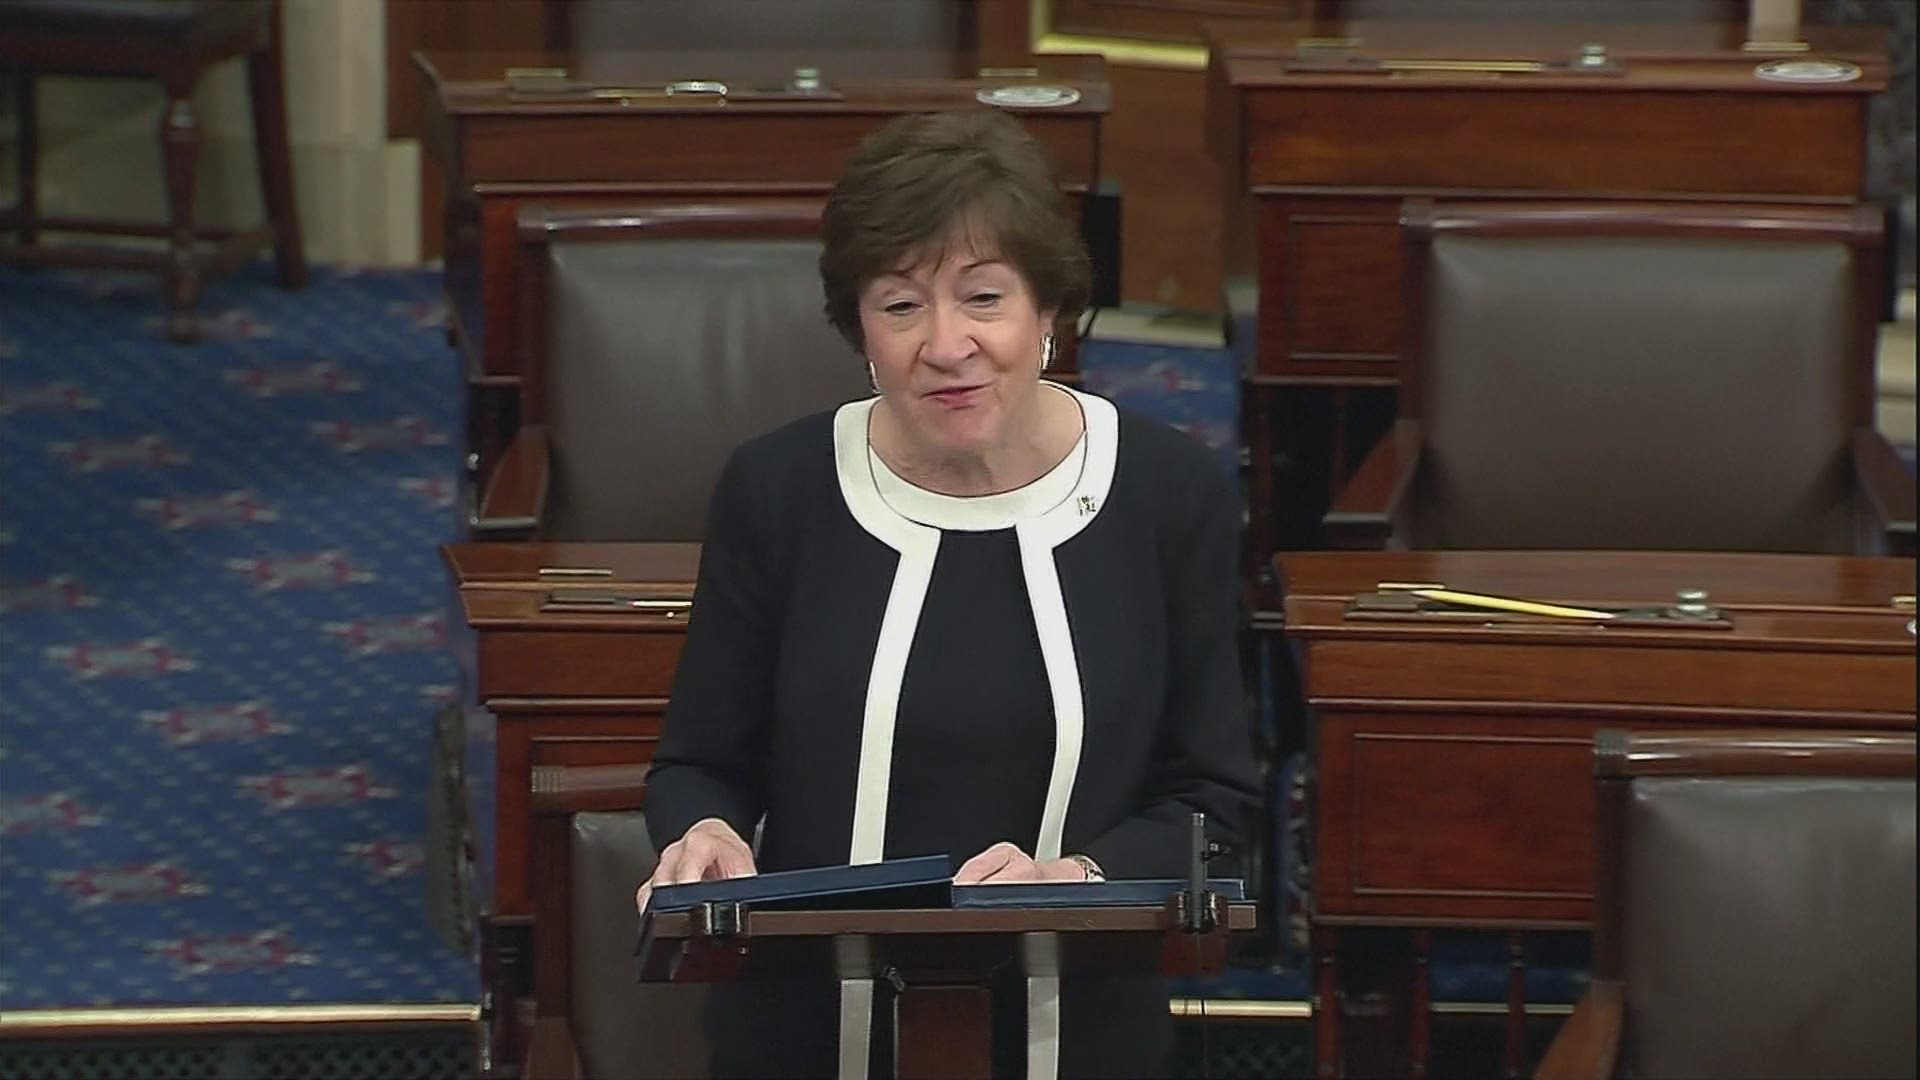 Both Sen. Susan Collins and Sen. Angus King voted to convict, along with six other Republican senators.